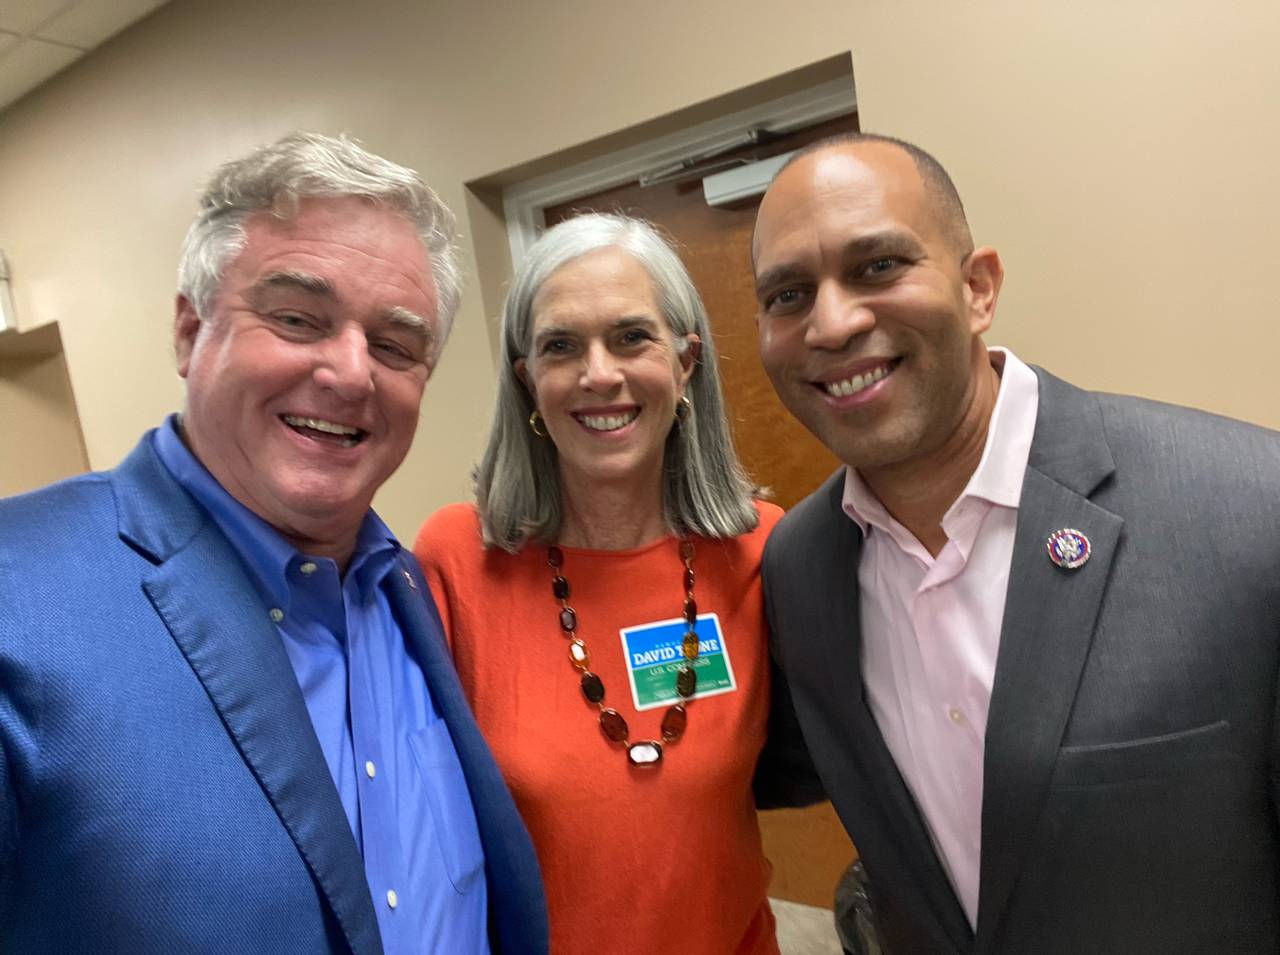 U.S. Rep. David Trone poses for a photo with U.S. Reps. Katherine Clark and Hakeem Jeffries, the top Democratic leaders in the U.S. House of Representatives. Clark and Jeffries have endorsed Trone's bid to become a U.S. senator.